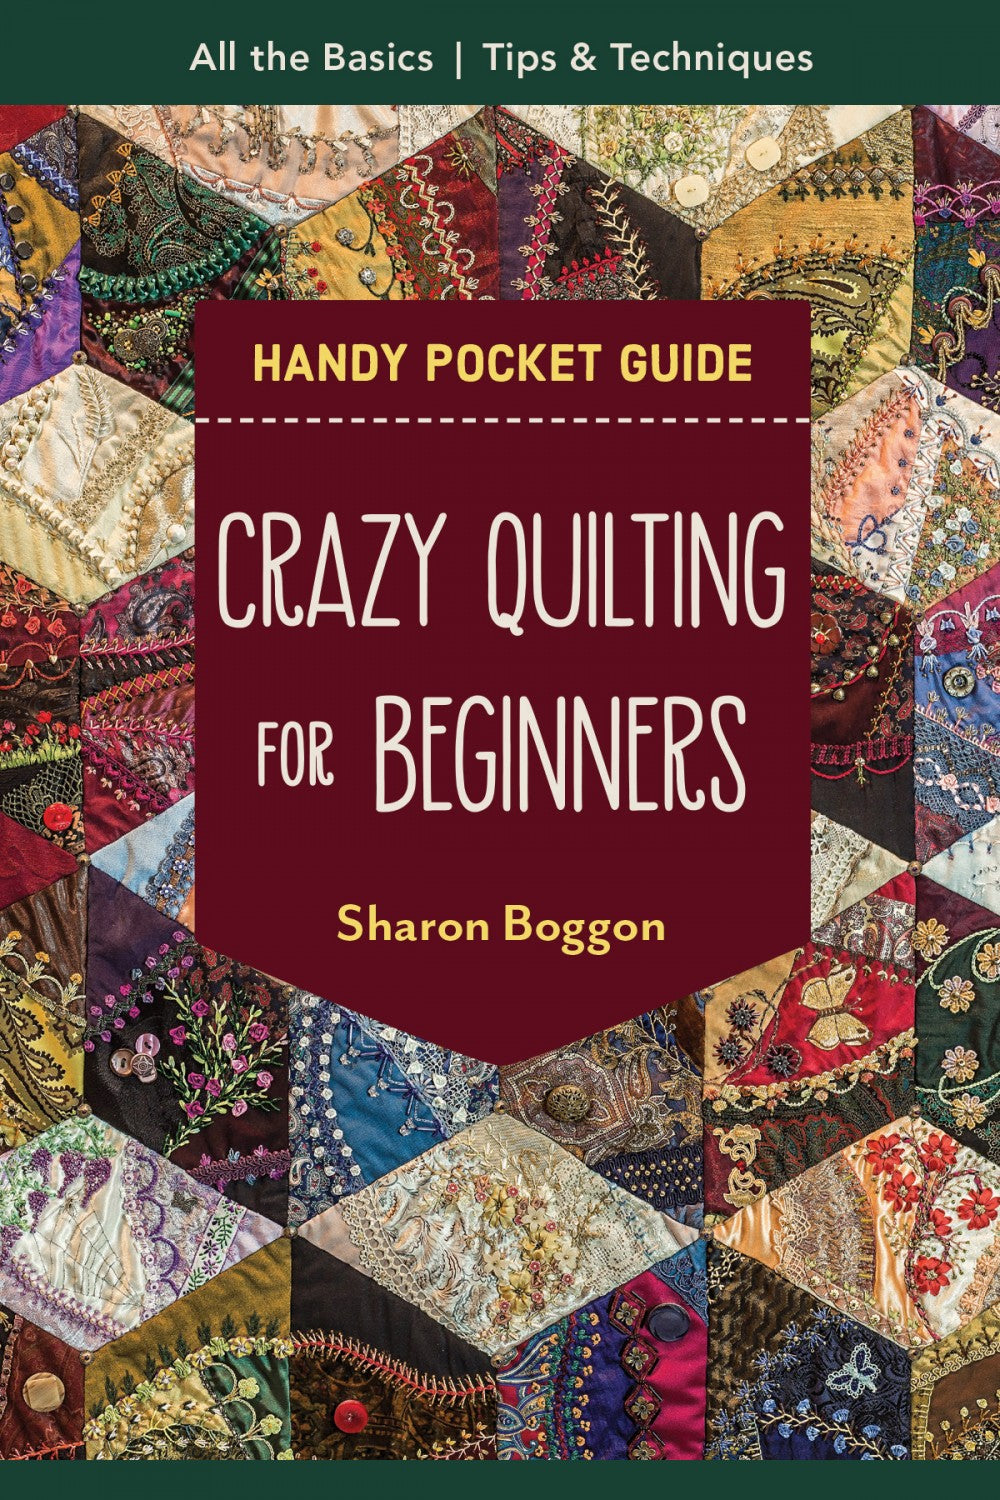 Pocket Guide | Crazy Quilting for Beginners